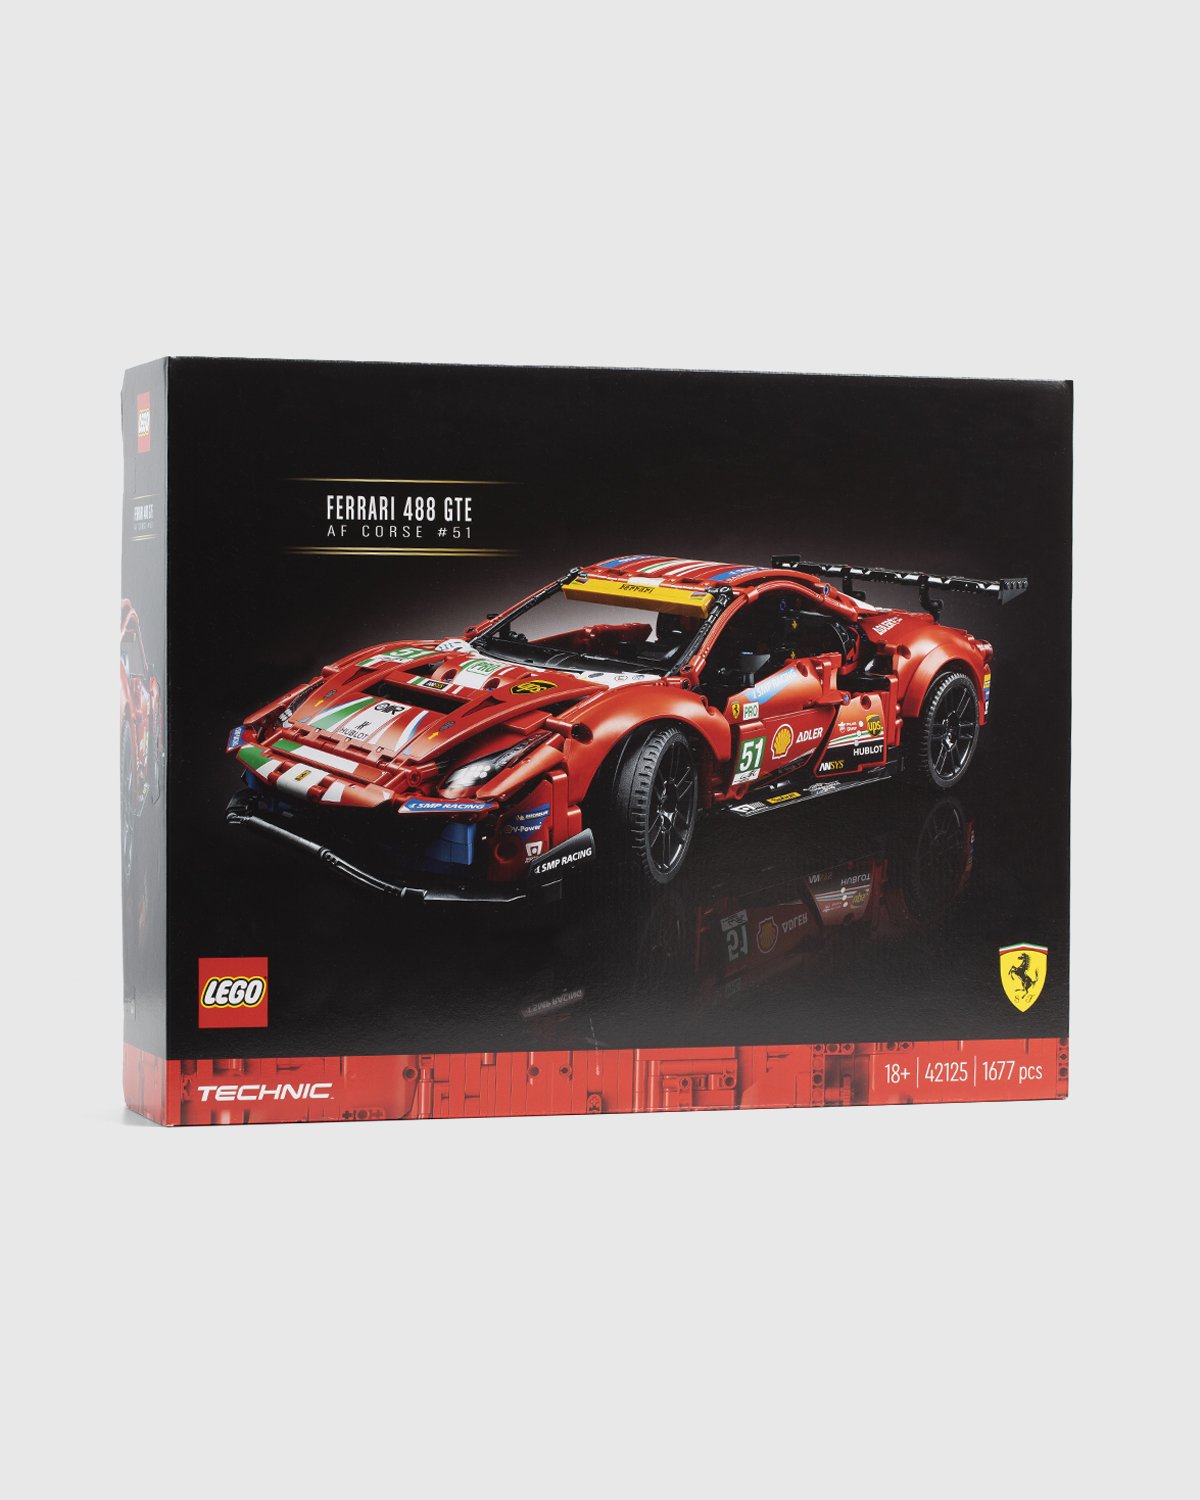 Lego - Technic Ferrari 488 GTE AF Corse 51 Red - Lifestyle - Red - Image 3